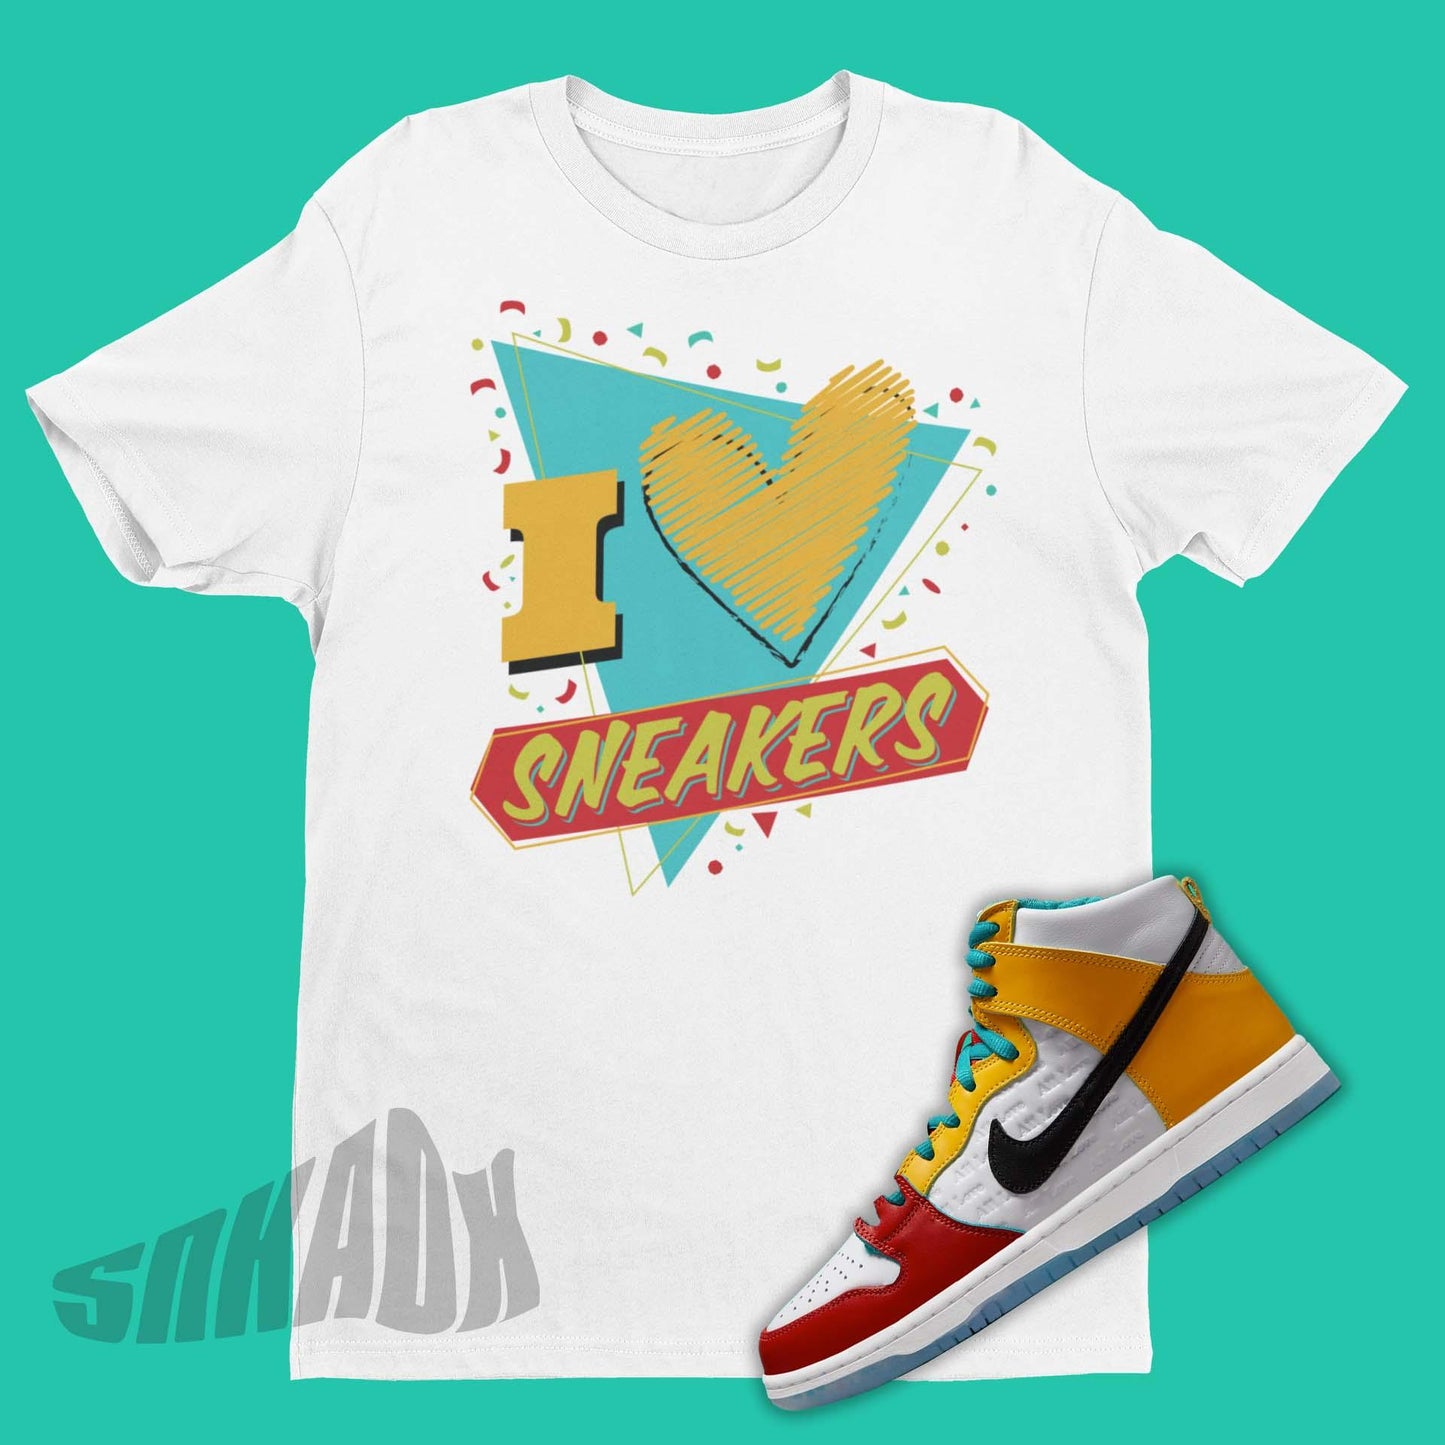 I Love Sneakers Shirt To Match FroSkate Nike SB Dunk High All Love No Hate